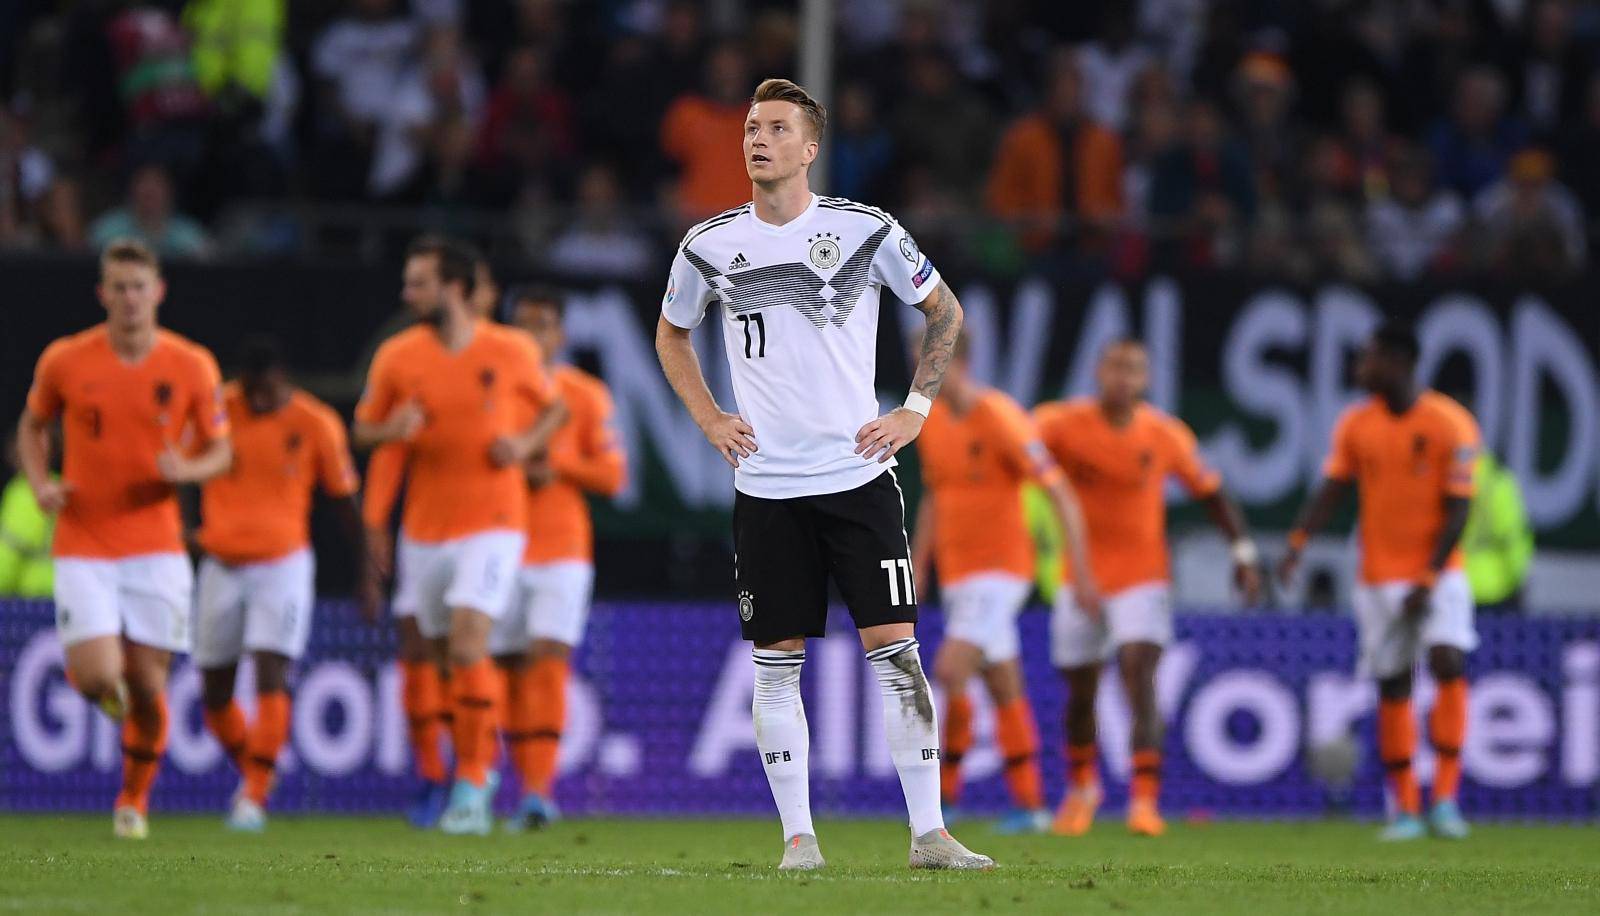 GES / Football / Germany - Netherlands, 06.09.2019